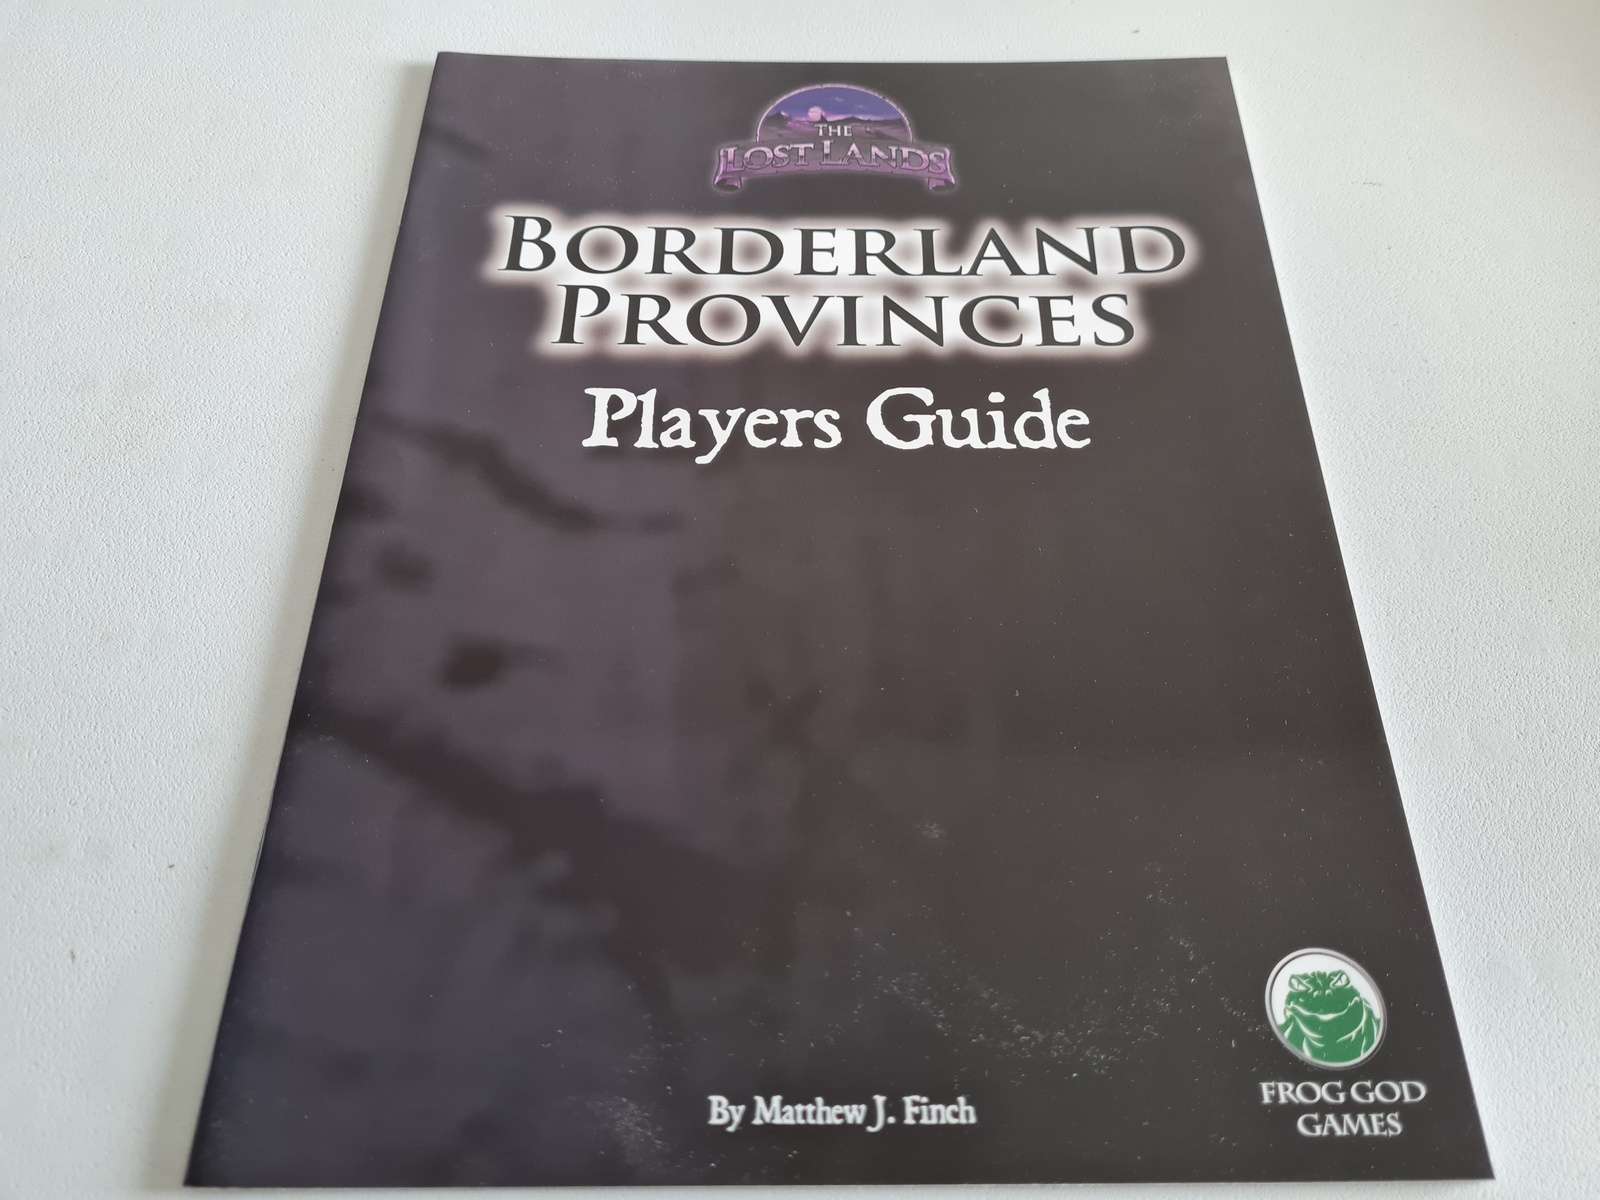 Borderland Provinces Players Guide (The Lost Lands)